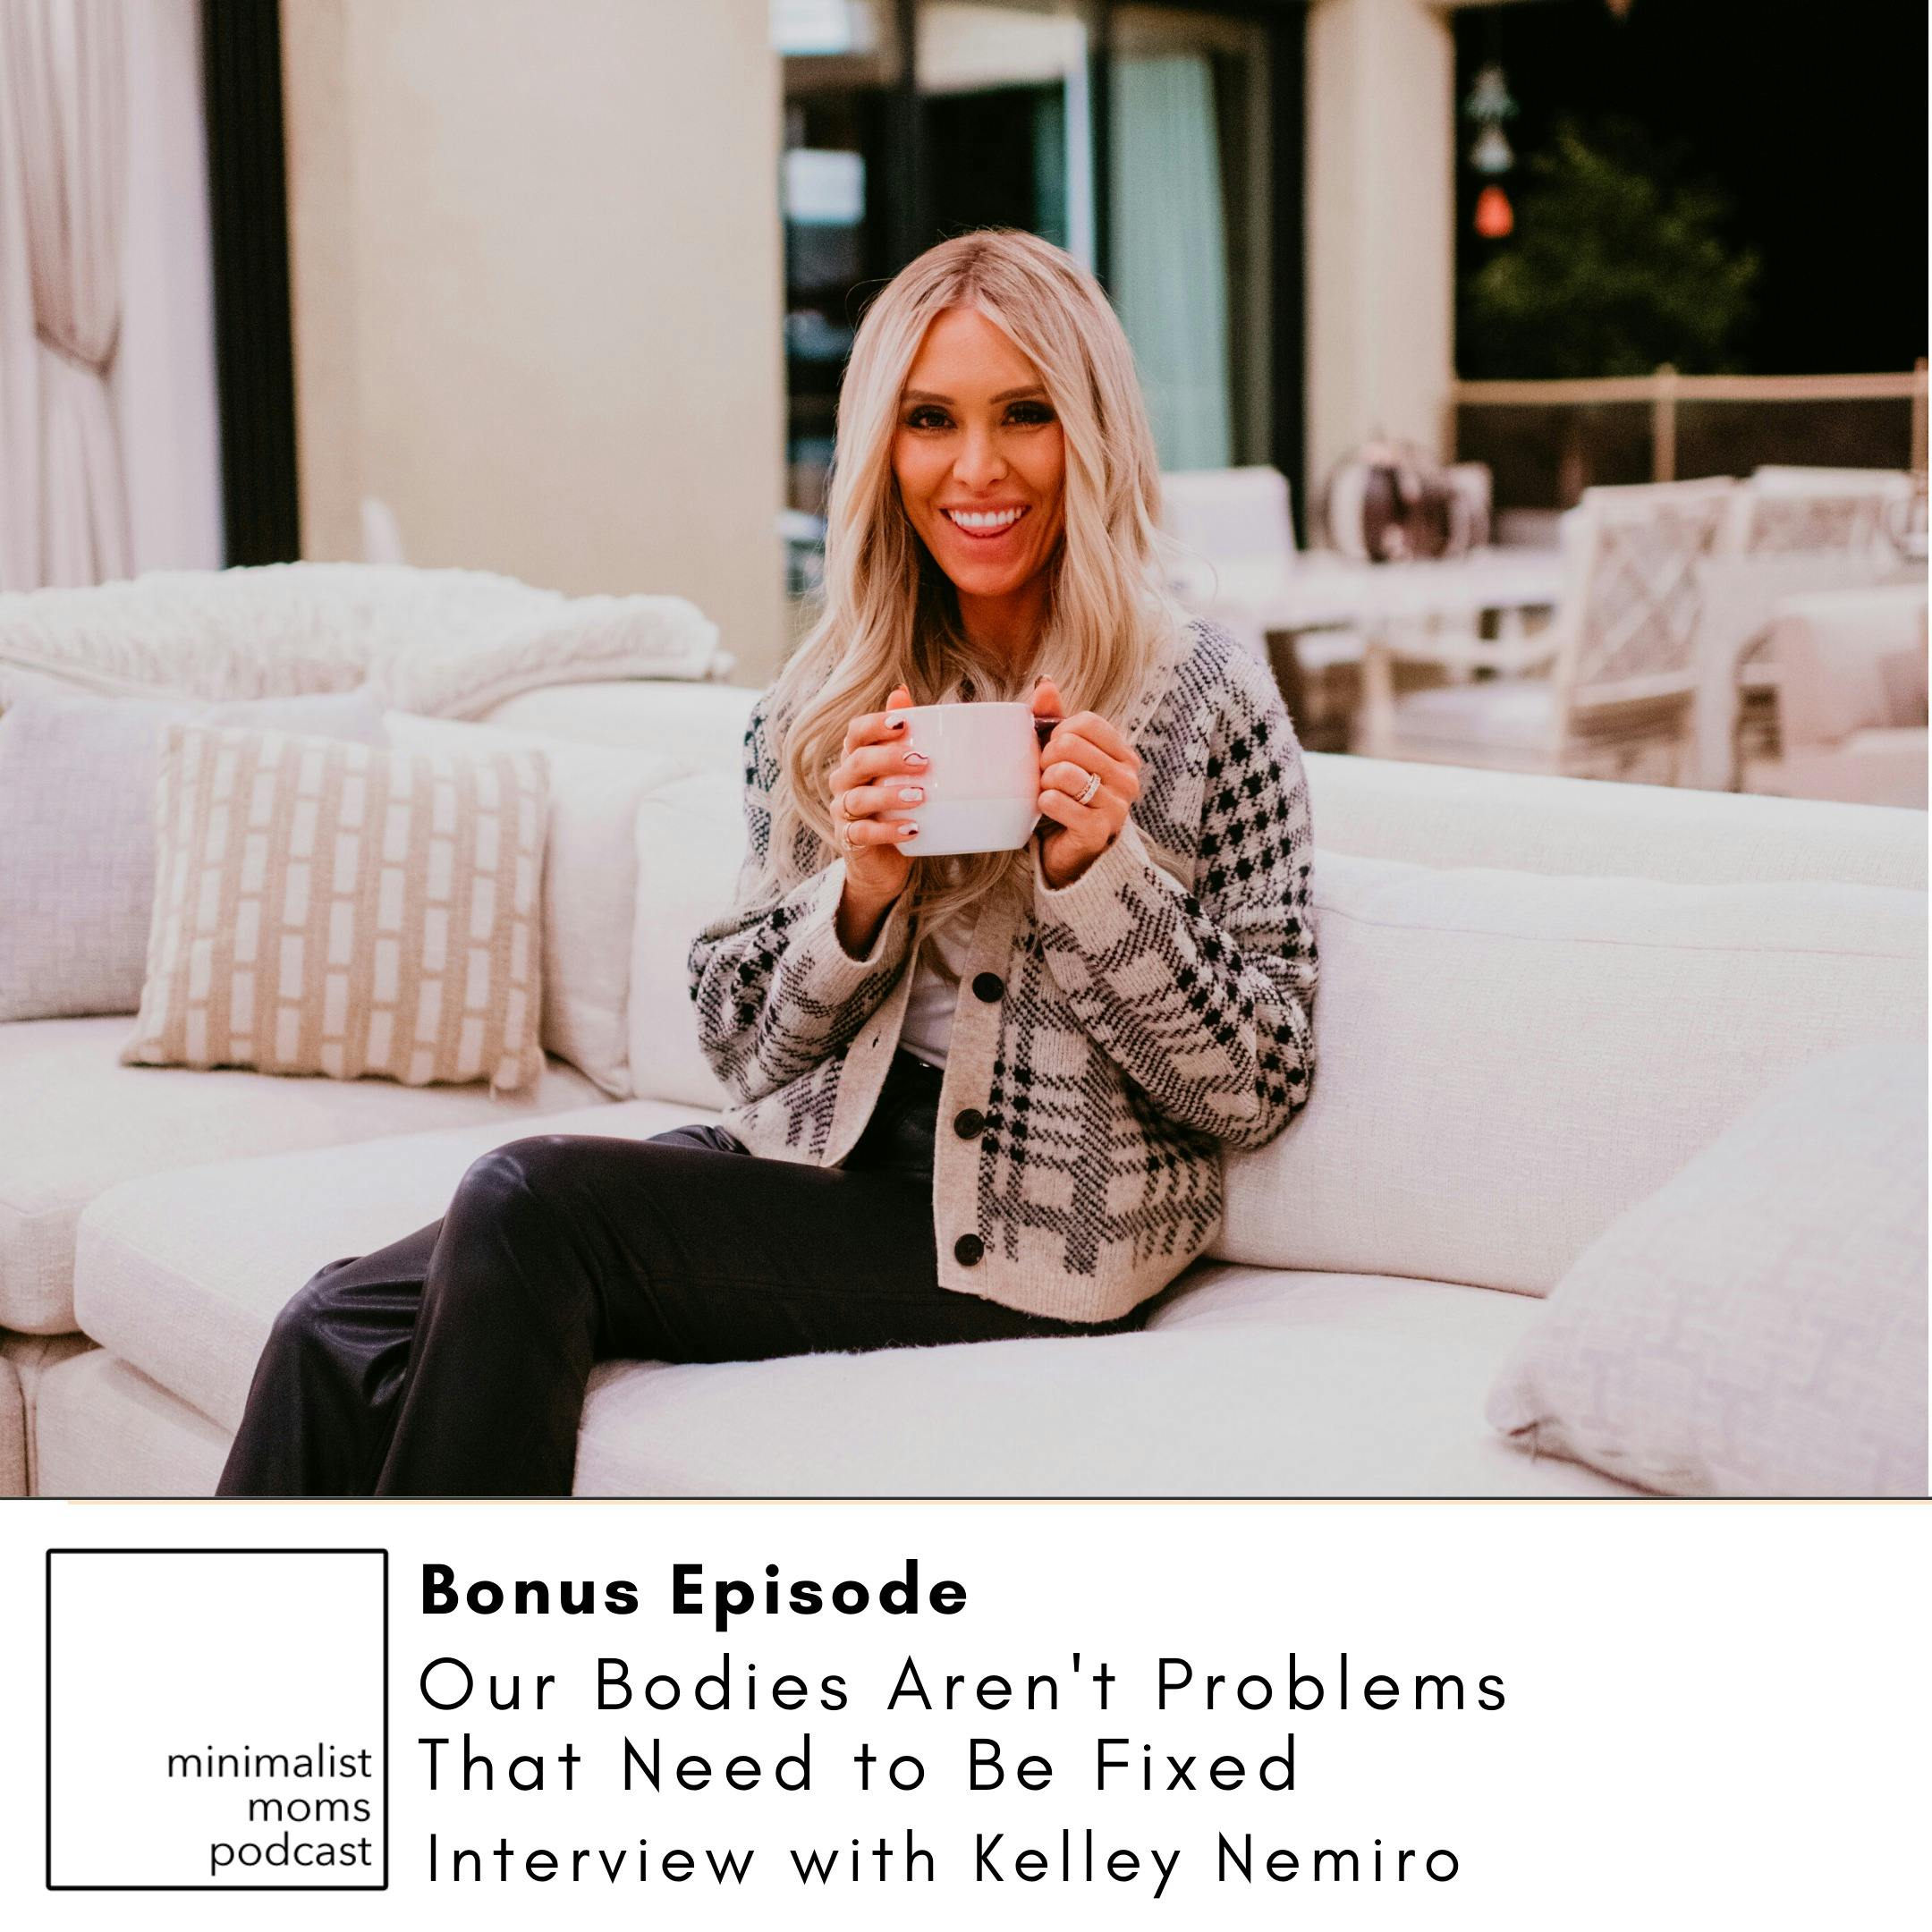 Bonus Episode: “Our Bodies Aren’t Problems That Need to Be Fixed” with Kelley Nemiro